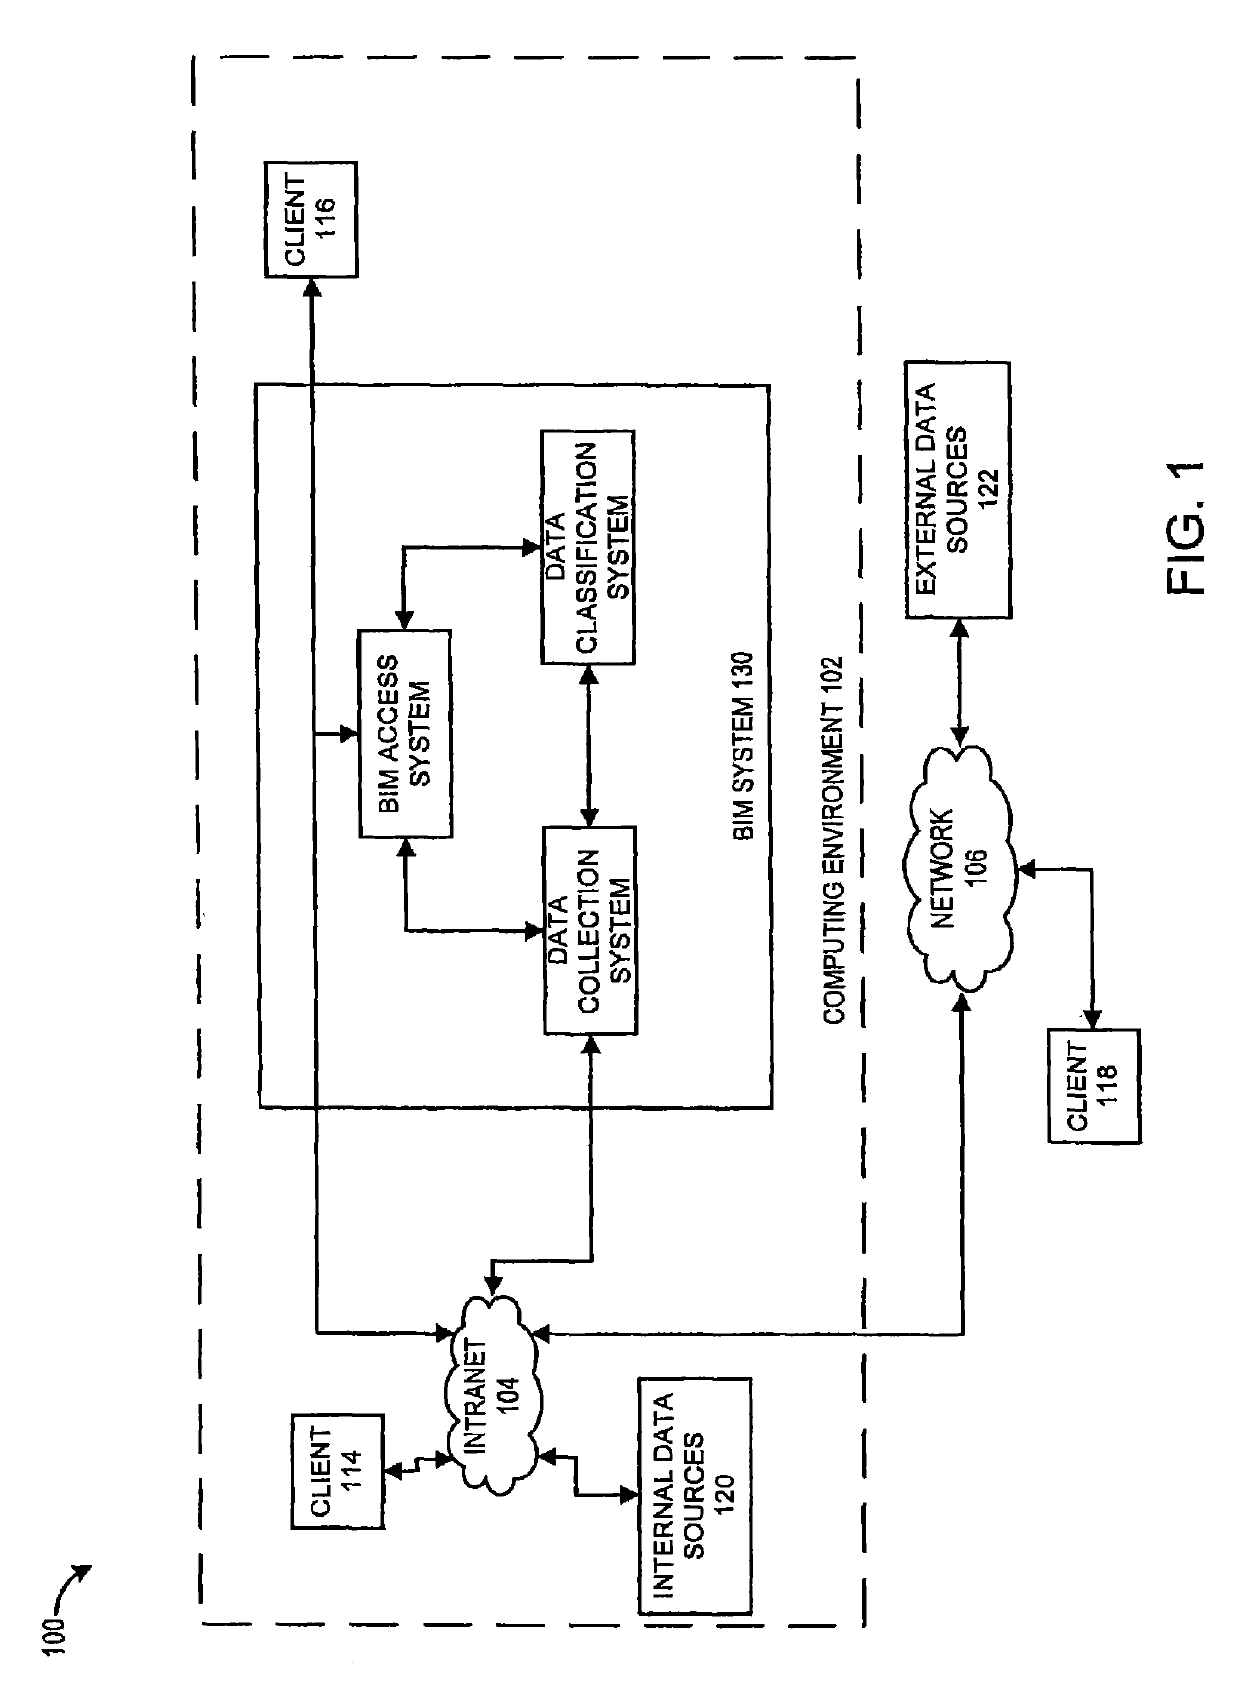 Systems and methods for event-based authentication